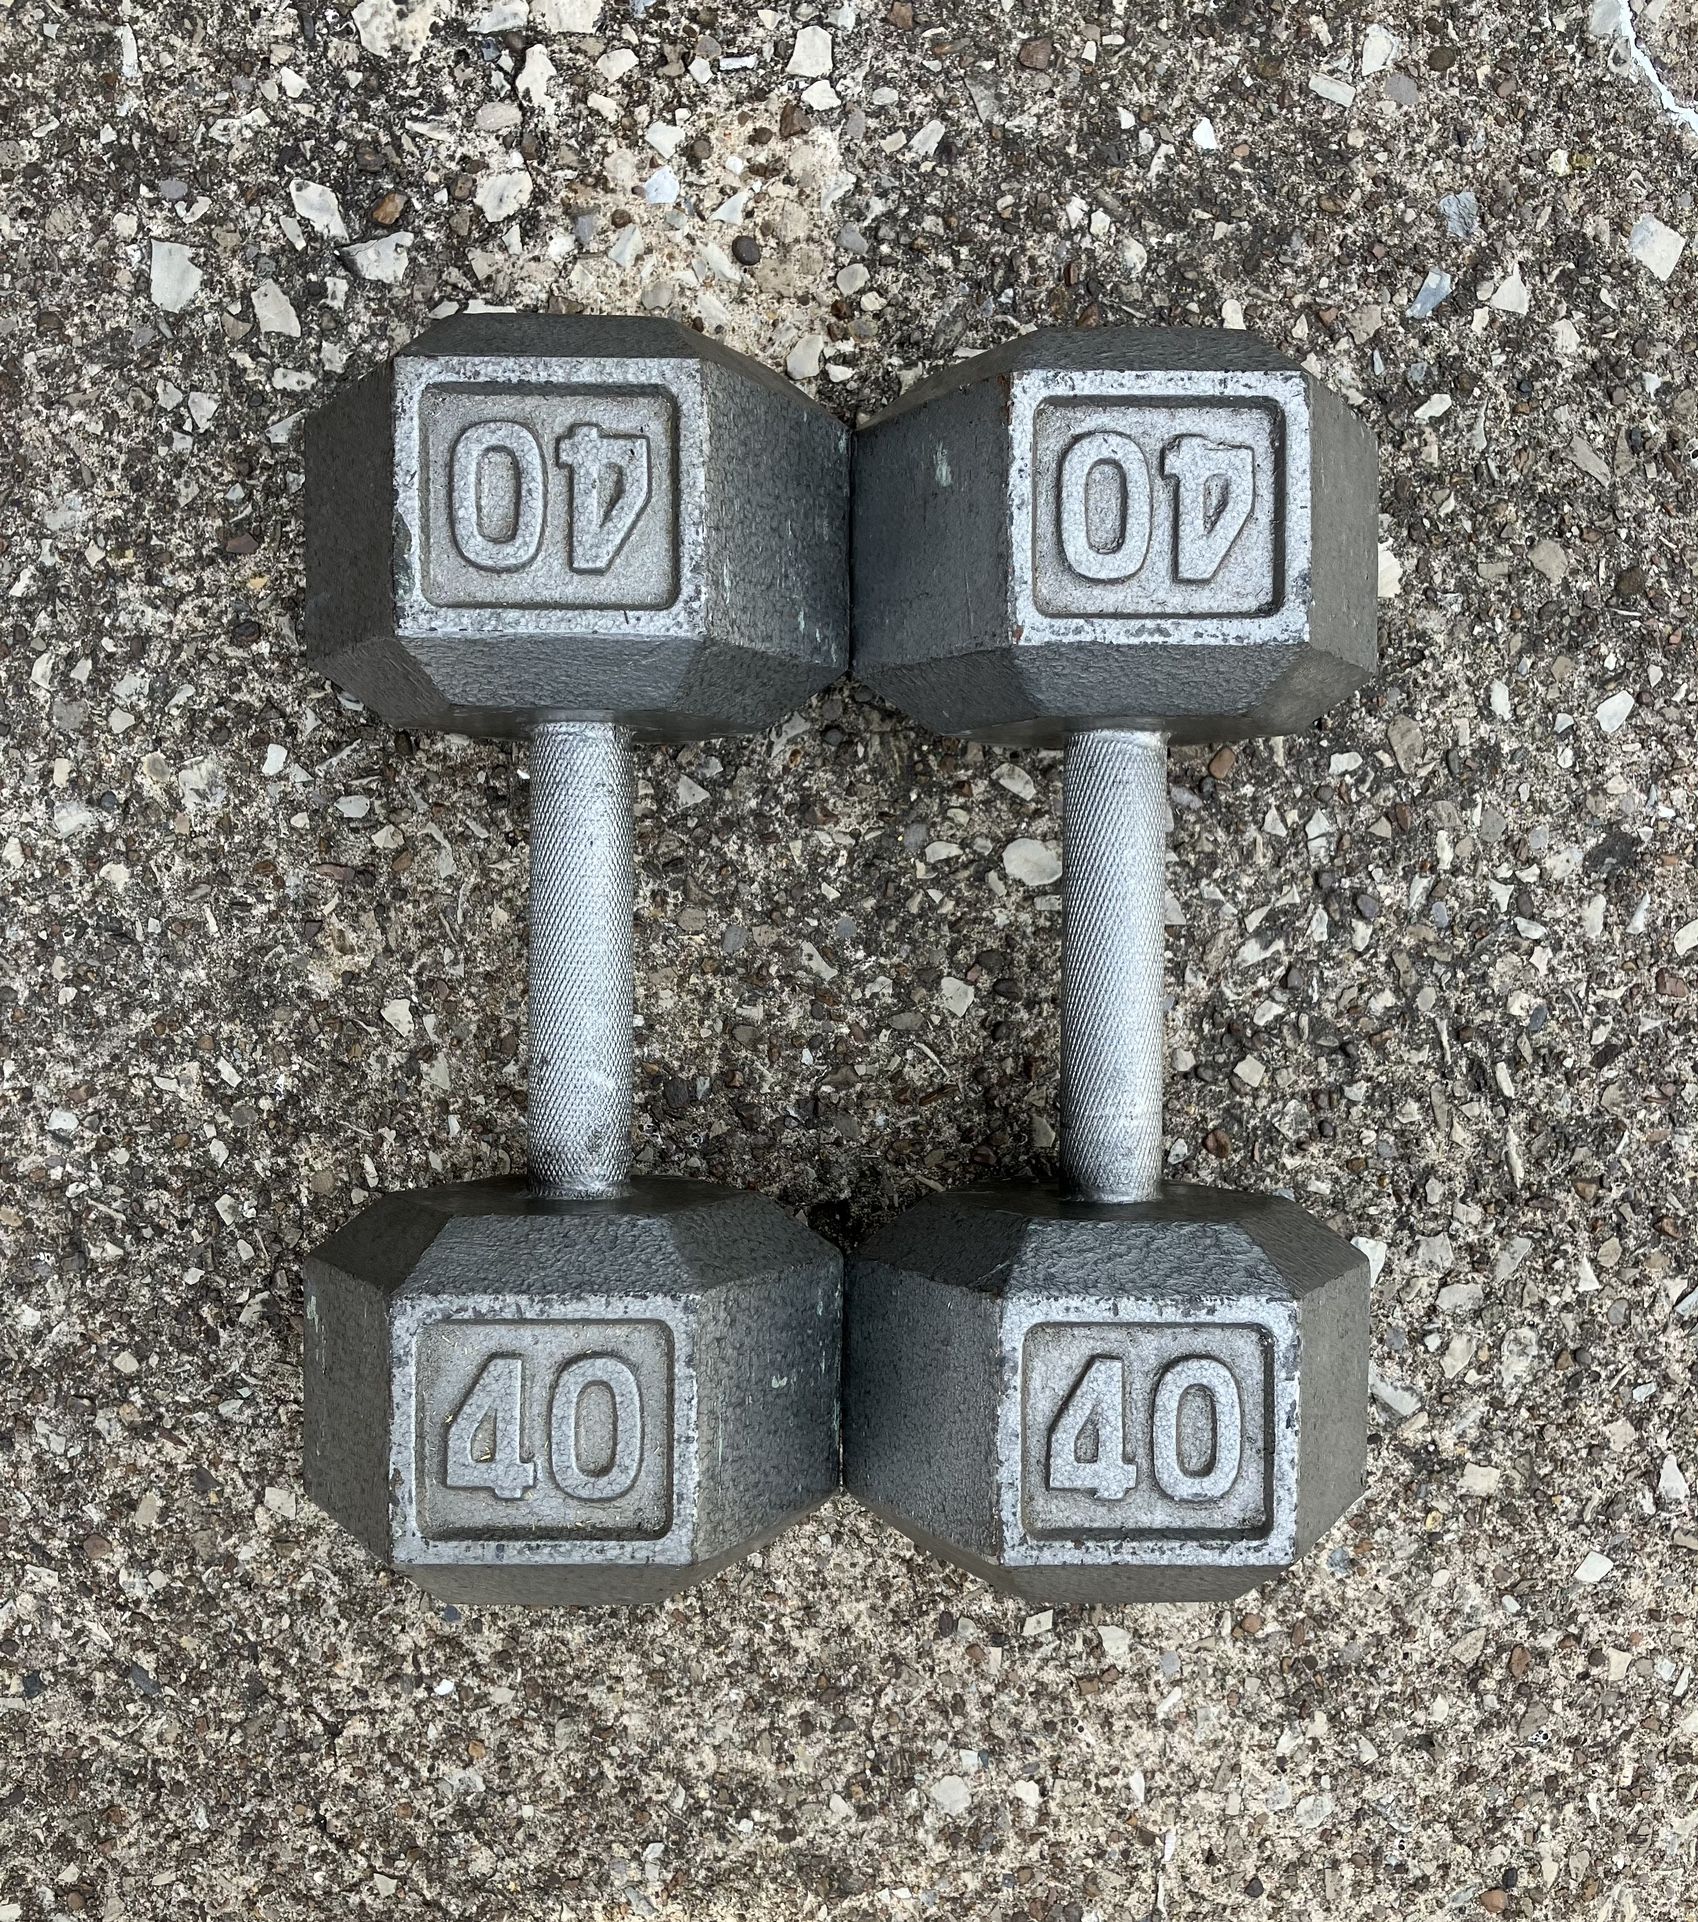 Dumbbells set 40 lb dumbbell lbs cast iron hex weights weight 40lb 40lbs pair pounds pound Metal